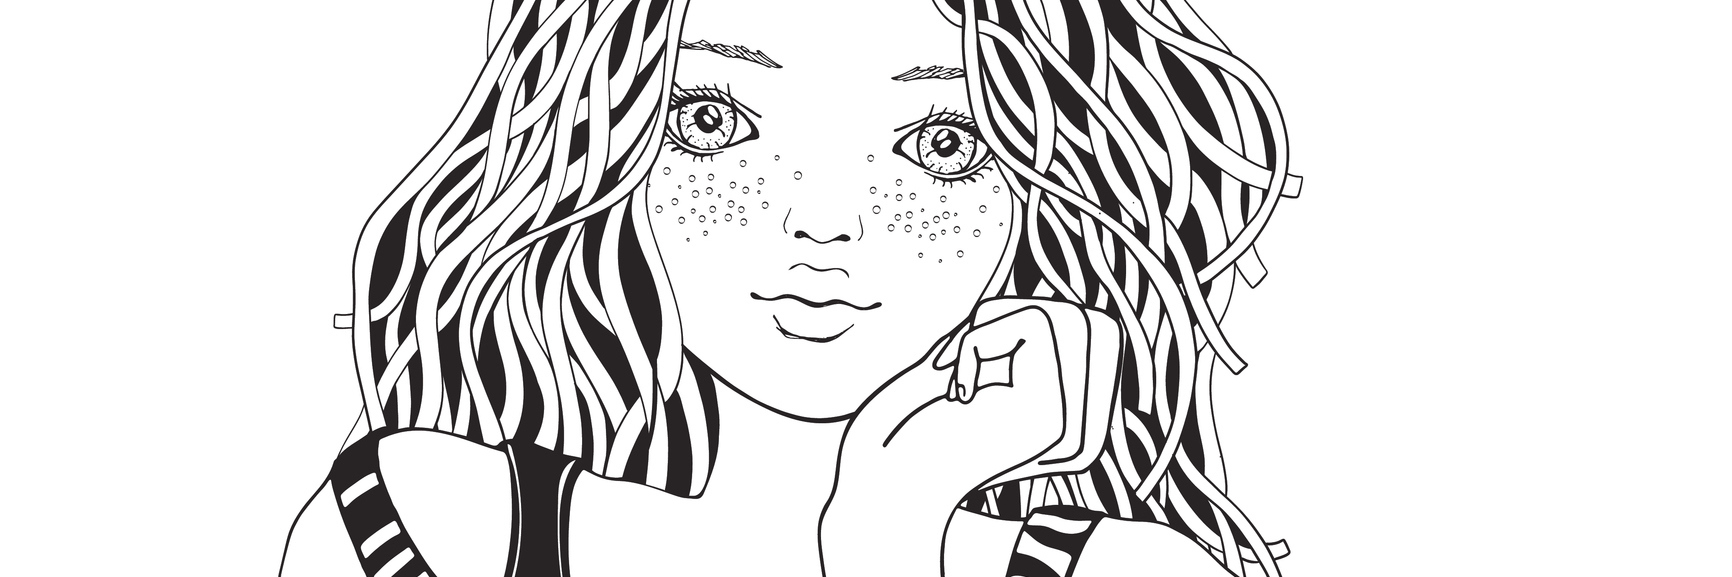 Cute girl in a striped sweater. Coloring book page for adult. Black and white. Doodle style.